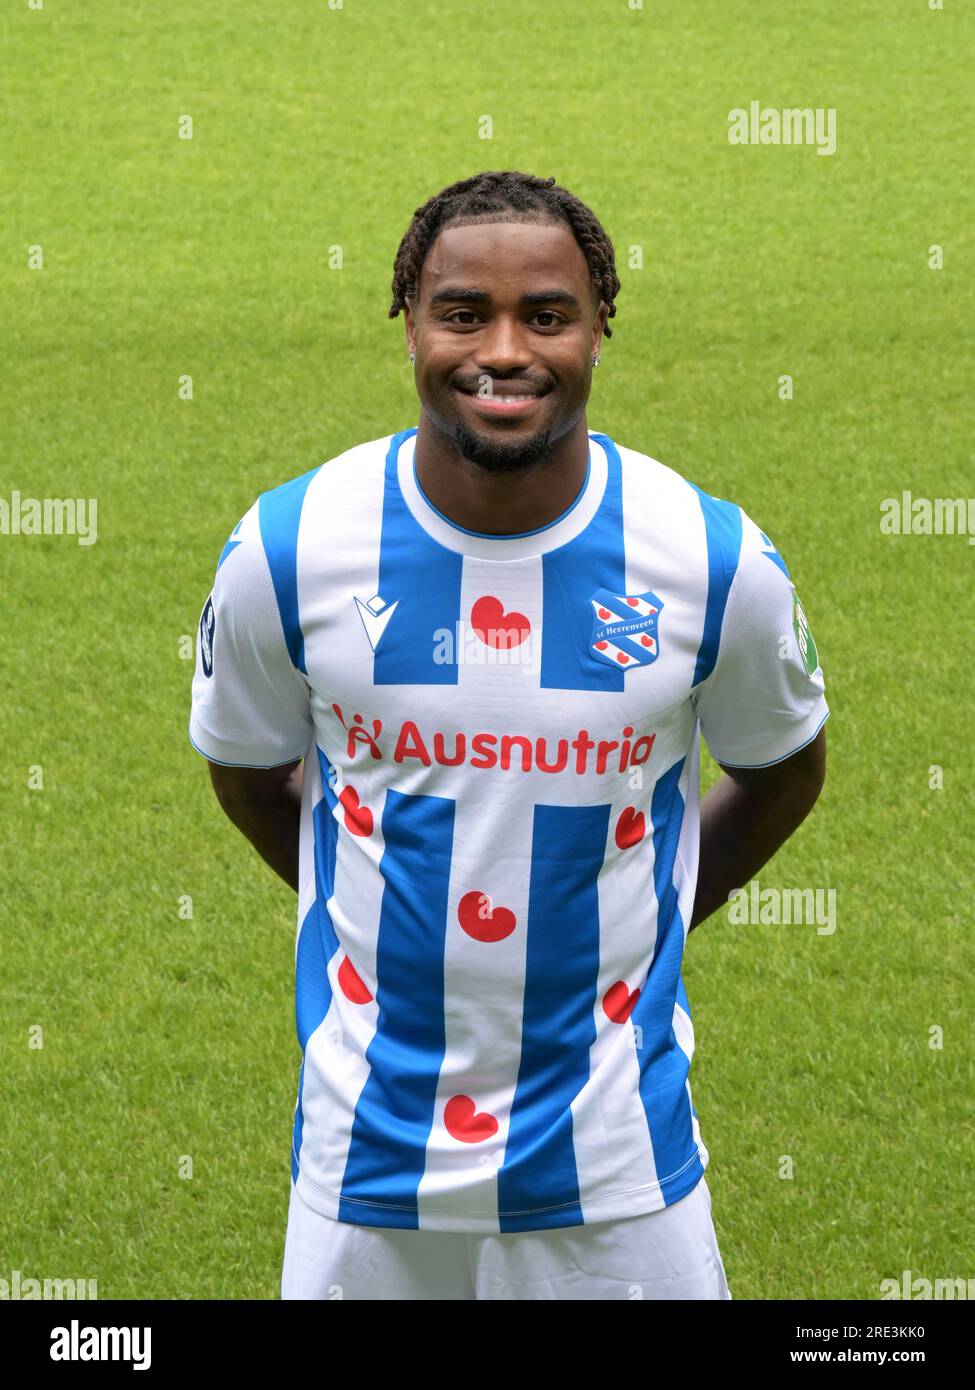 HERENVEEN -Che Nunnely during the Photo Press Day of sc Heerenveen at the Abe Lenstra Stadium on July 24, 2023 in Heerenveen, Netherlands. AP | Dutch Height | GERRIT OF COLOGNE Stock Photo